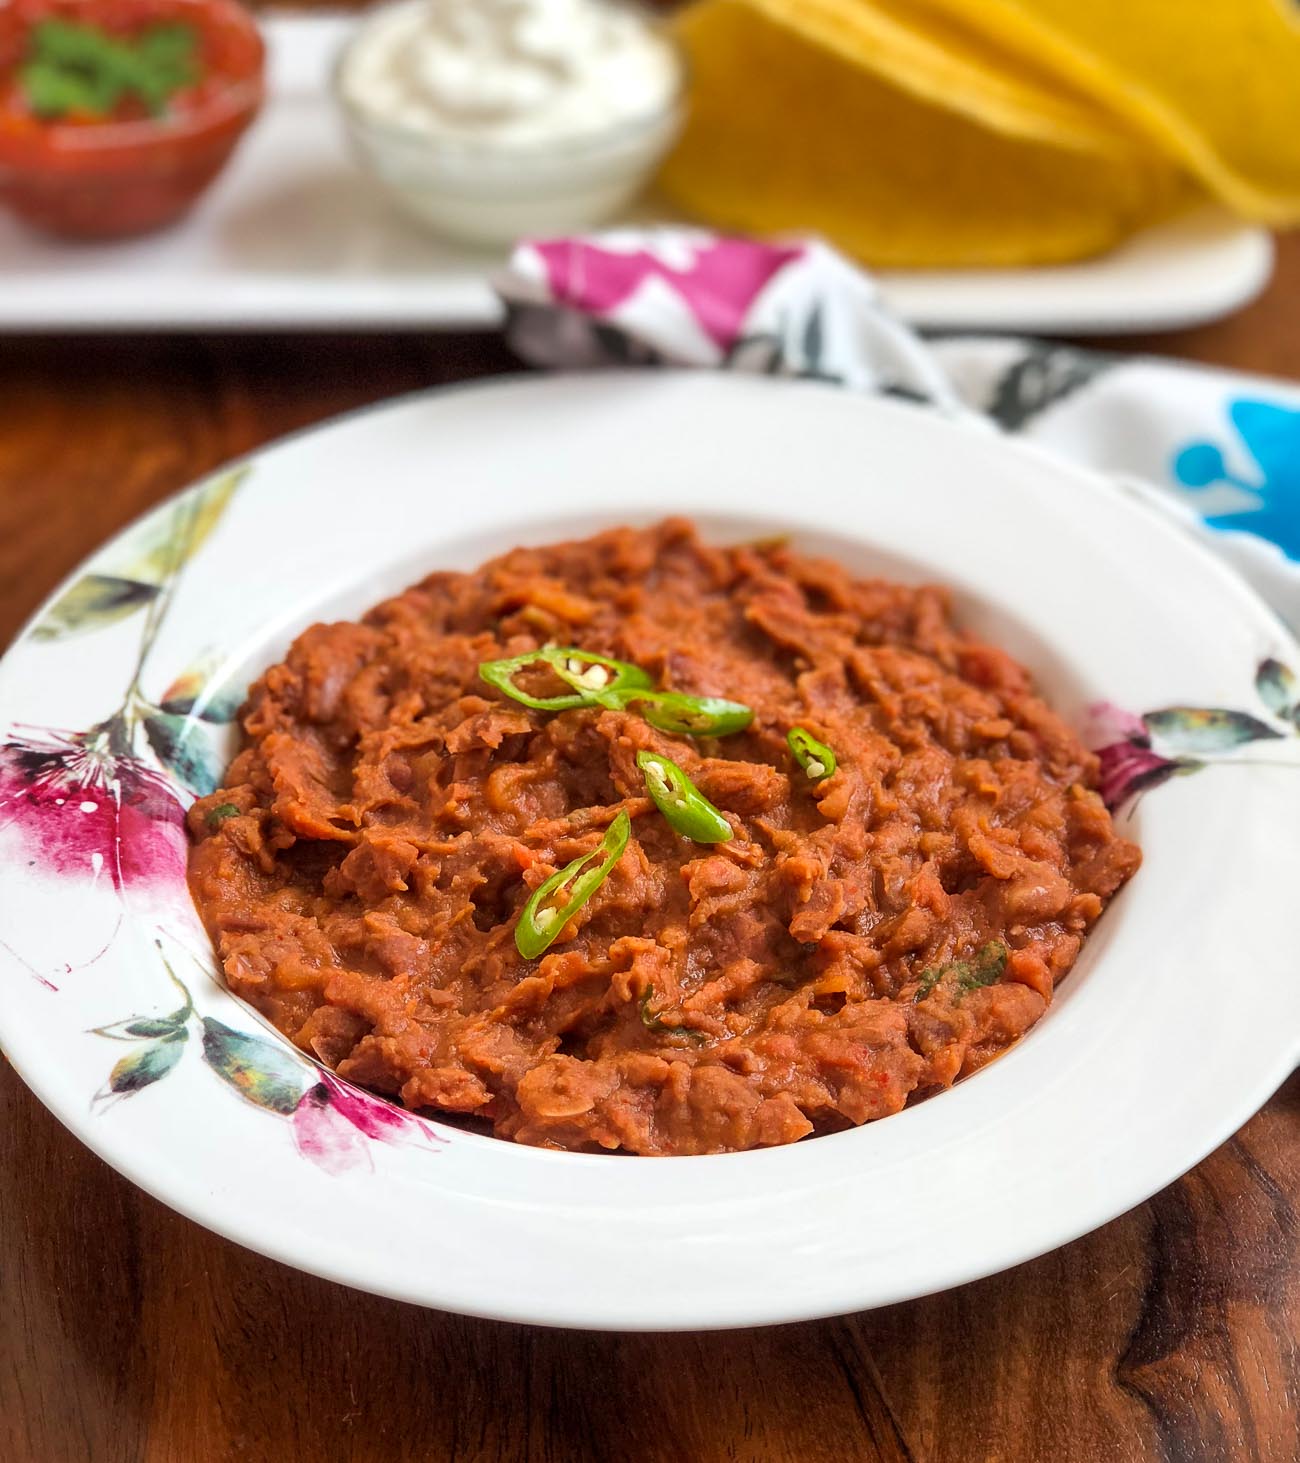 Homemade Refried Beans Recipe - Quick & Easy Mexican Beans